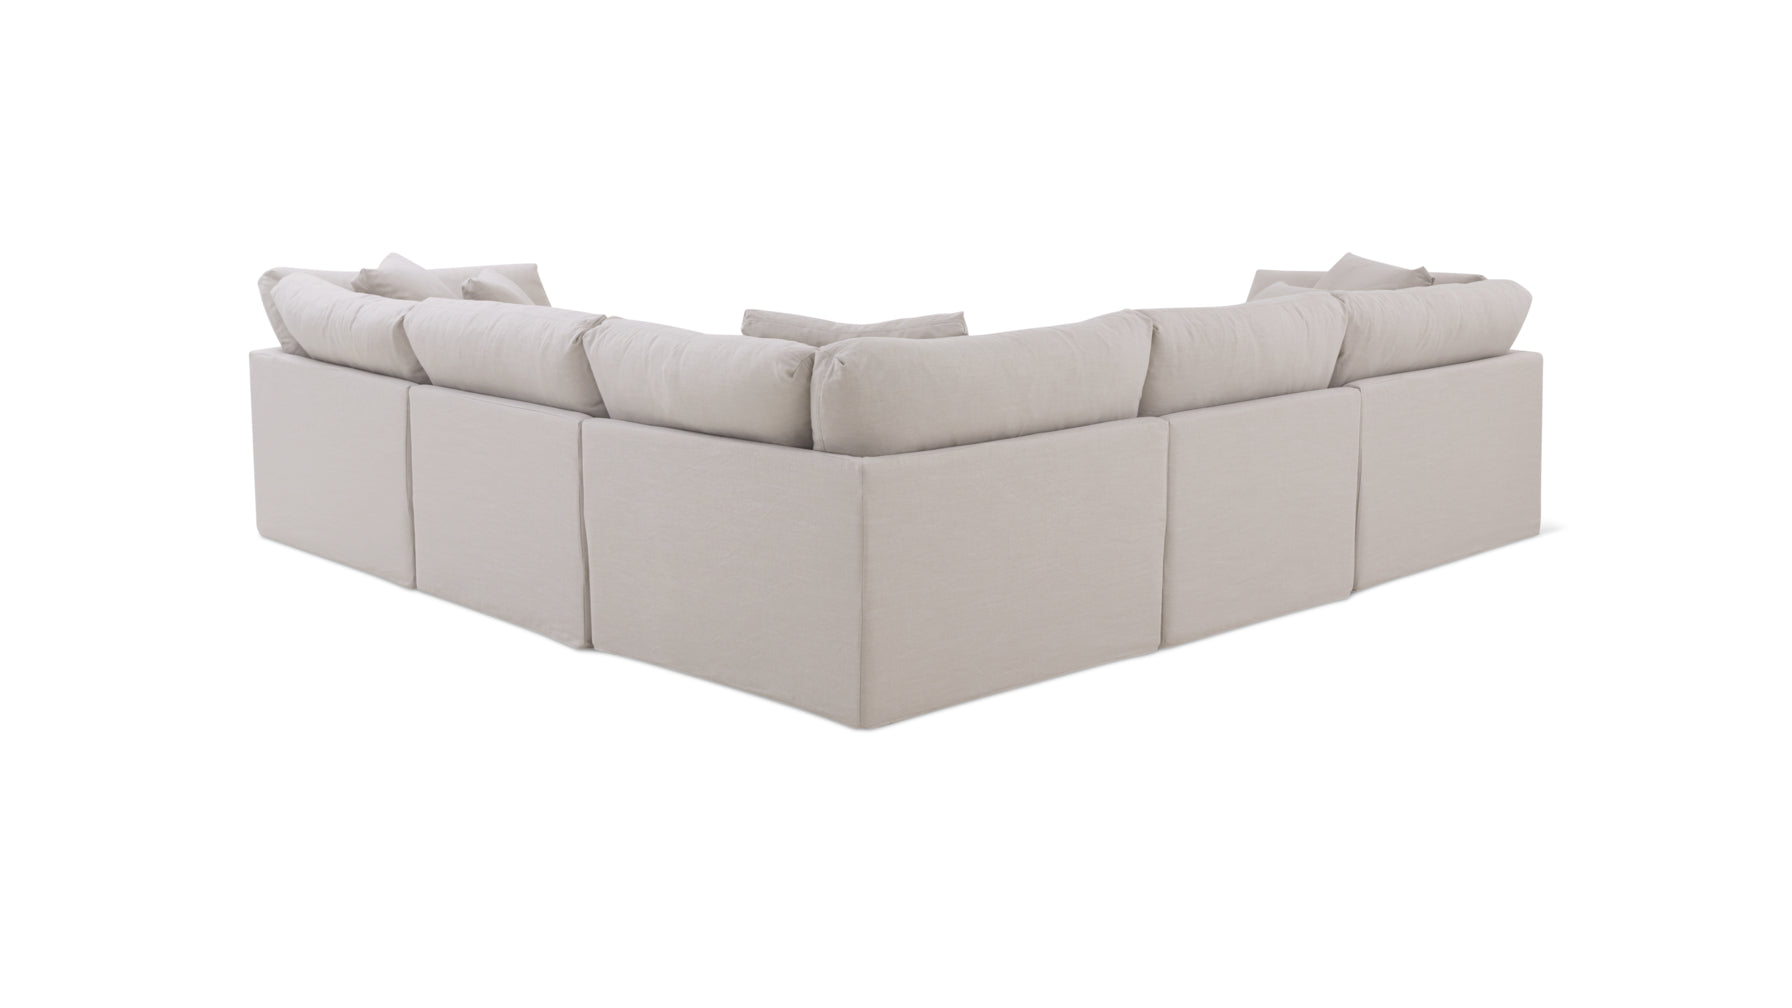 Get Together™ 5-Piece Modular Sectional Closed, Large, Clay - Image 9